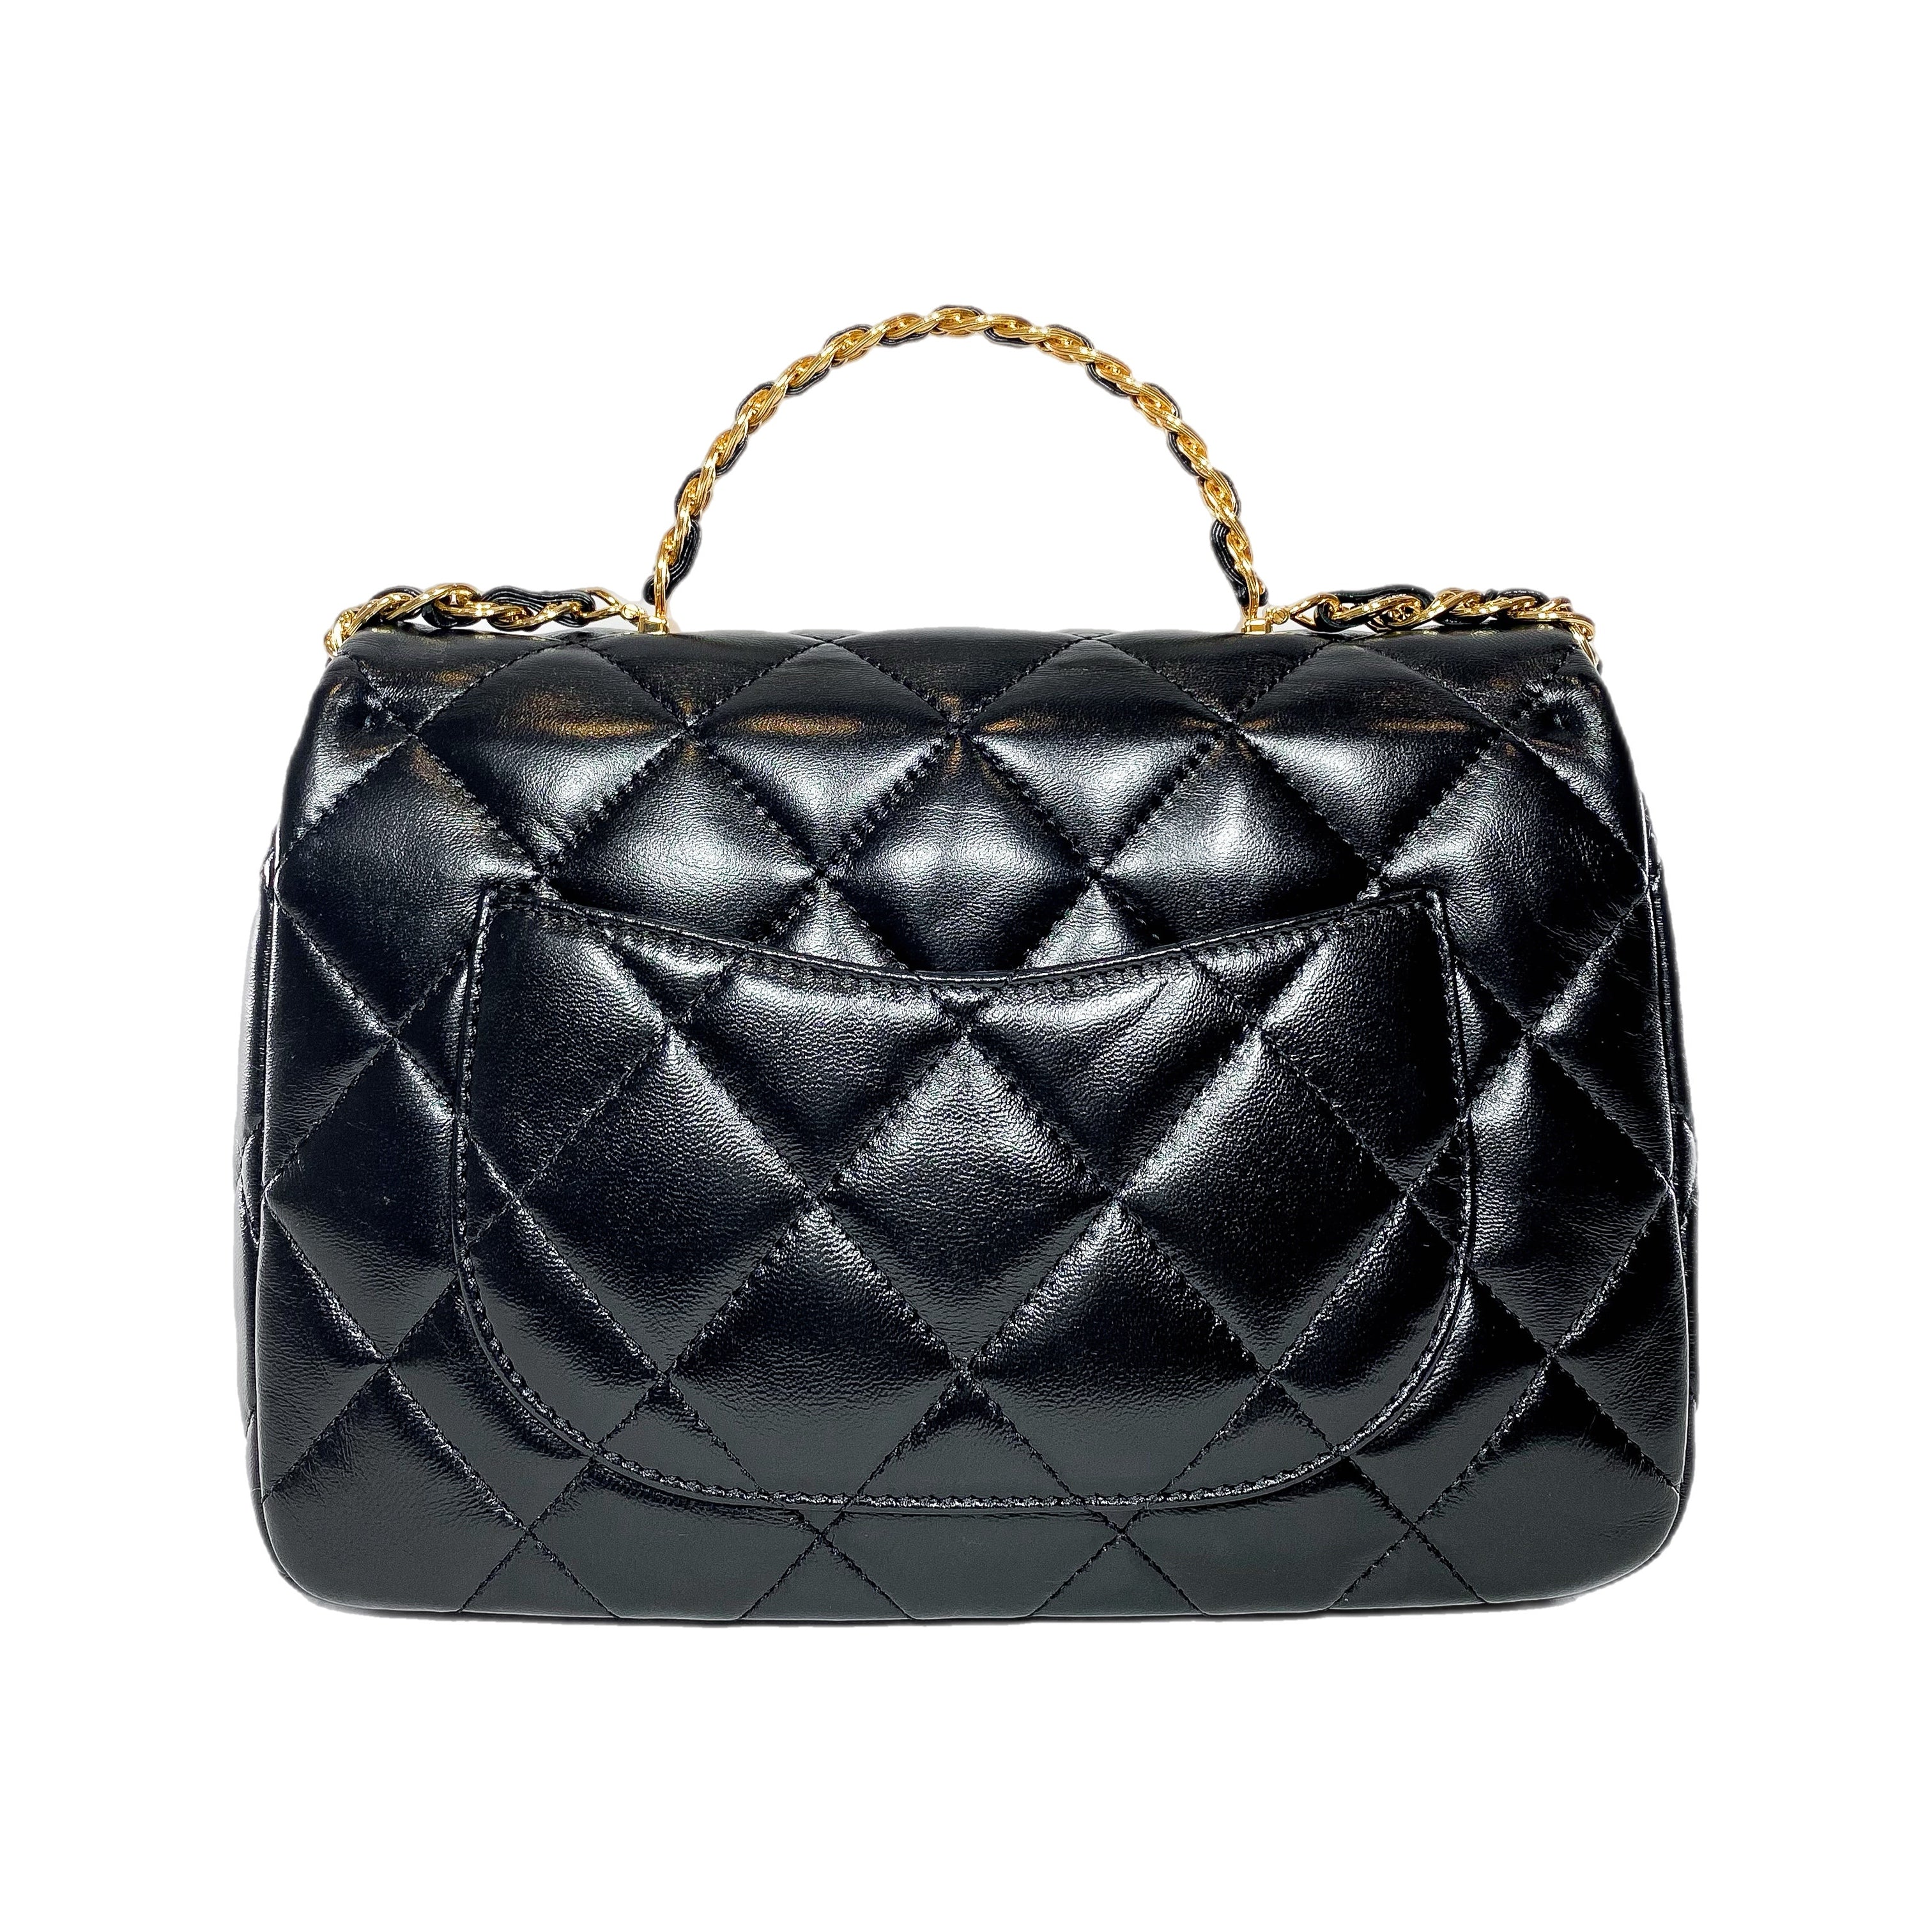 Chanel Black Shiny Quilted Golden Links Top Handle Flap Bag